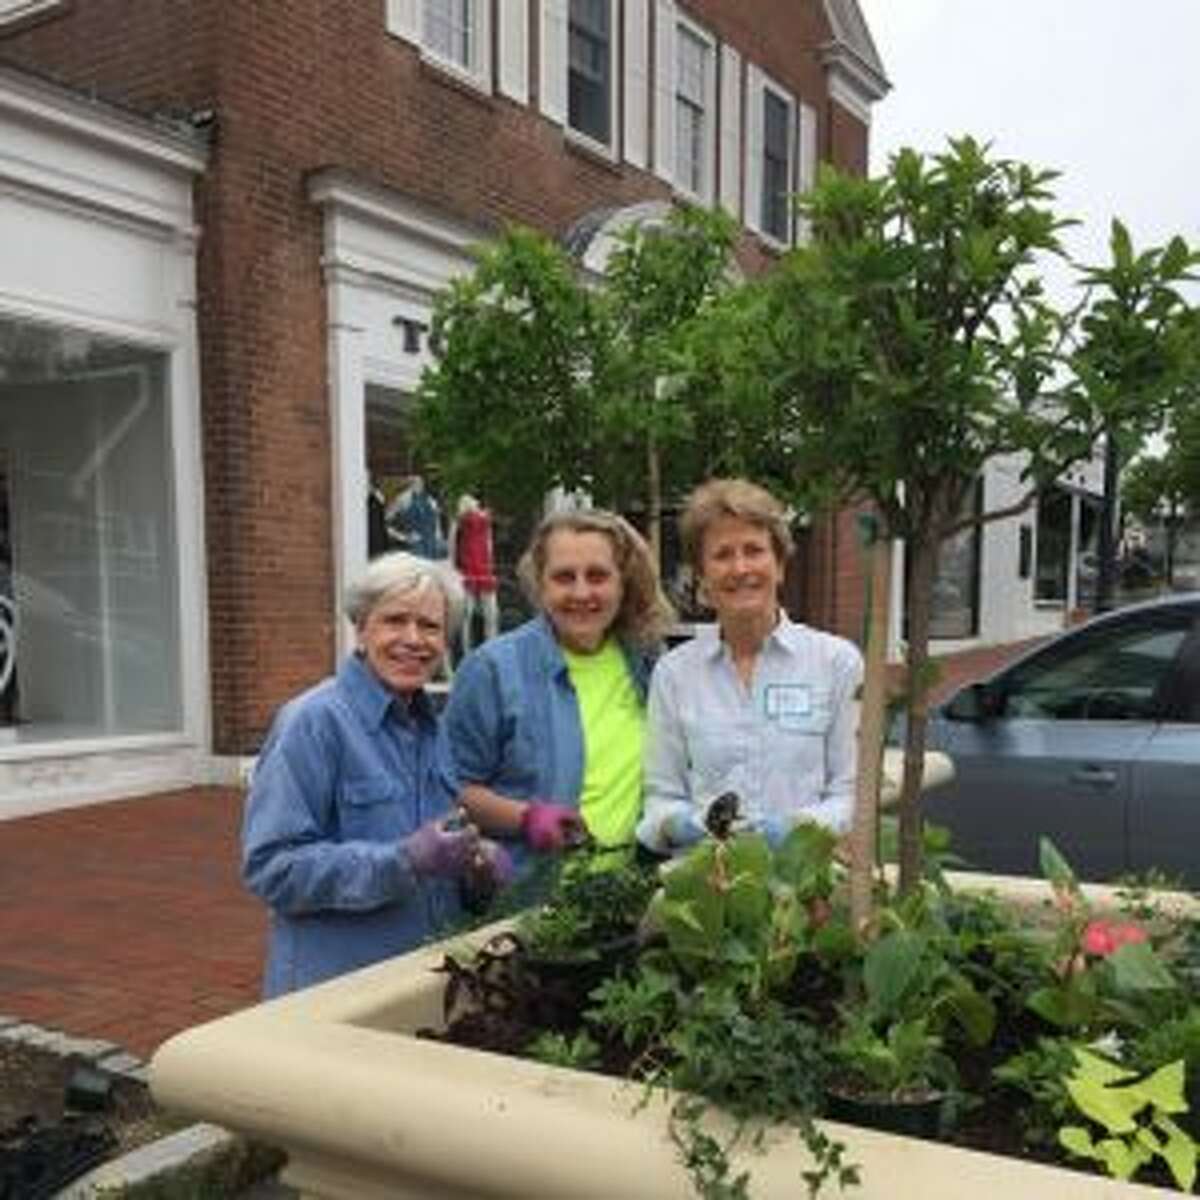 From left Beautification League members Gerta Smith, Betsy Sammarco and Betsy Bilus work on a planter in town. - Contributed photo